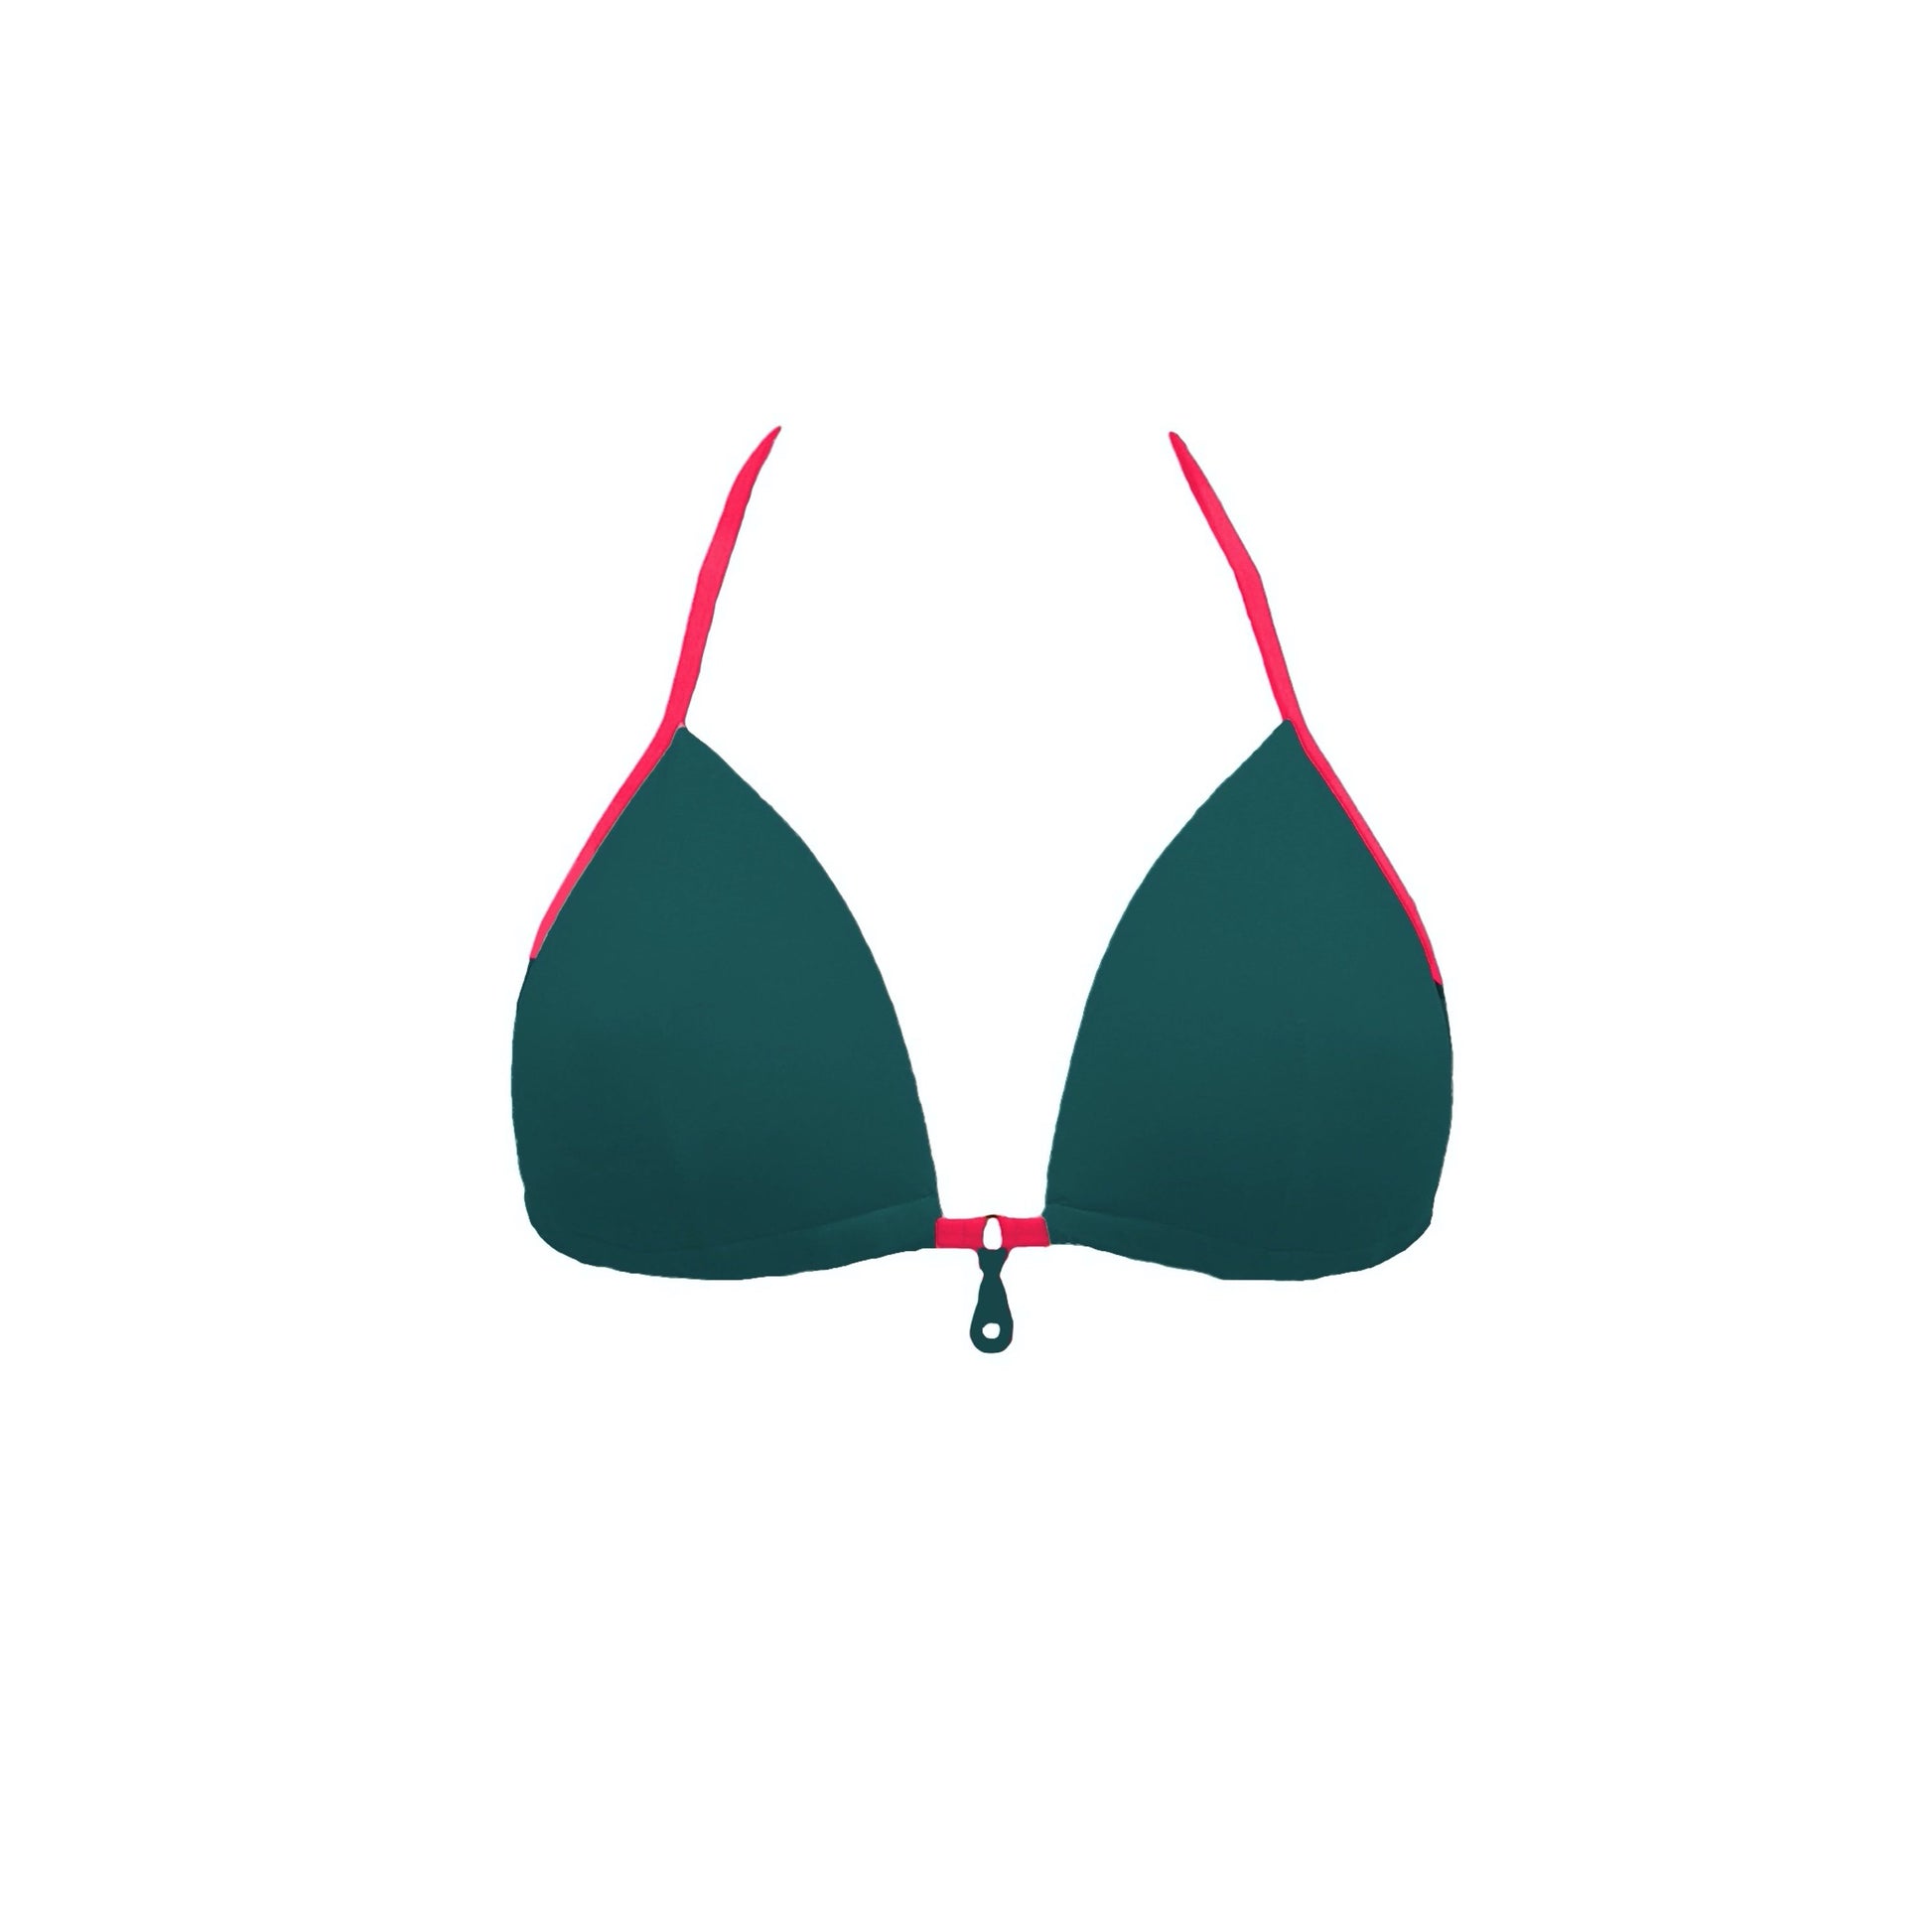 Totally adjustable dark green bikini set with push-up bra and bottom. Pink straps and zipper detail. Really comfortable for pool or beach. This bikini will never upset you, it will alway be one of your favorites. Parte superior bikini verde oscuro. Parte superior bikini de lazos.